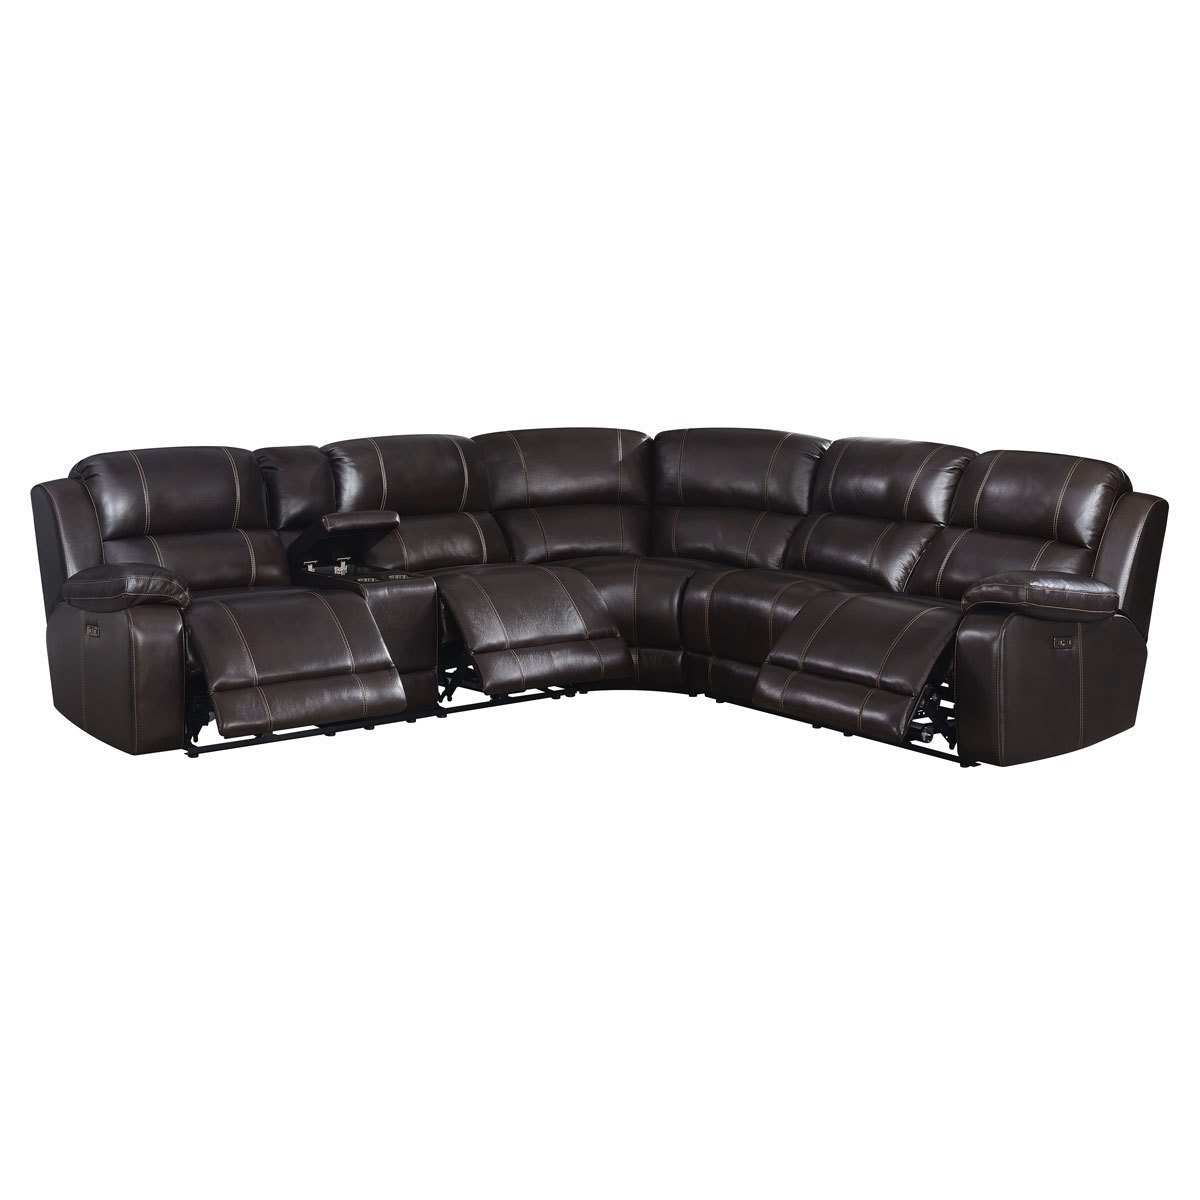 Pulaski Dunhill Brown Leather Power Reclining Sectional Sofa - Signature Retail Stores